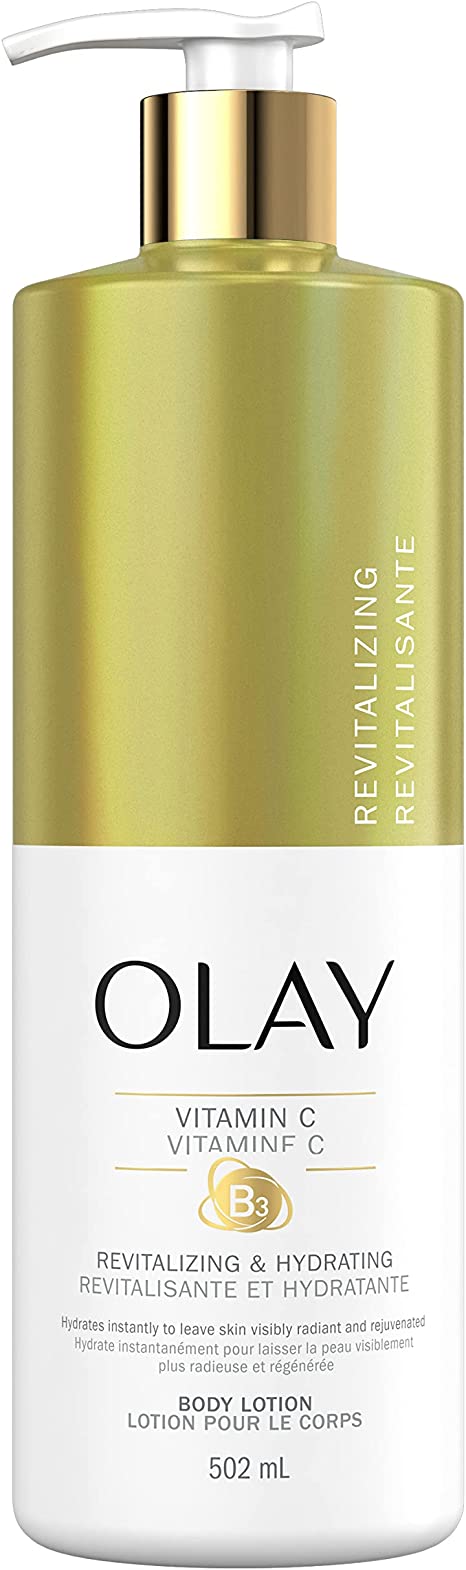 Olay Revitalizing & Hydrating Hand and Body Lotion with Vitamin C & Vitamin B3, 502 mL